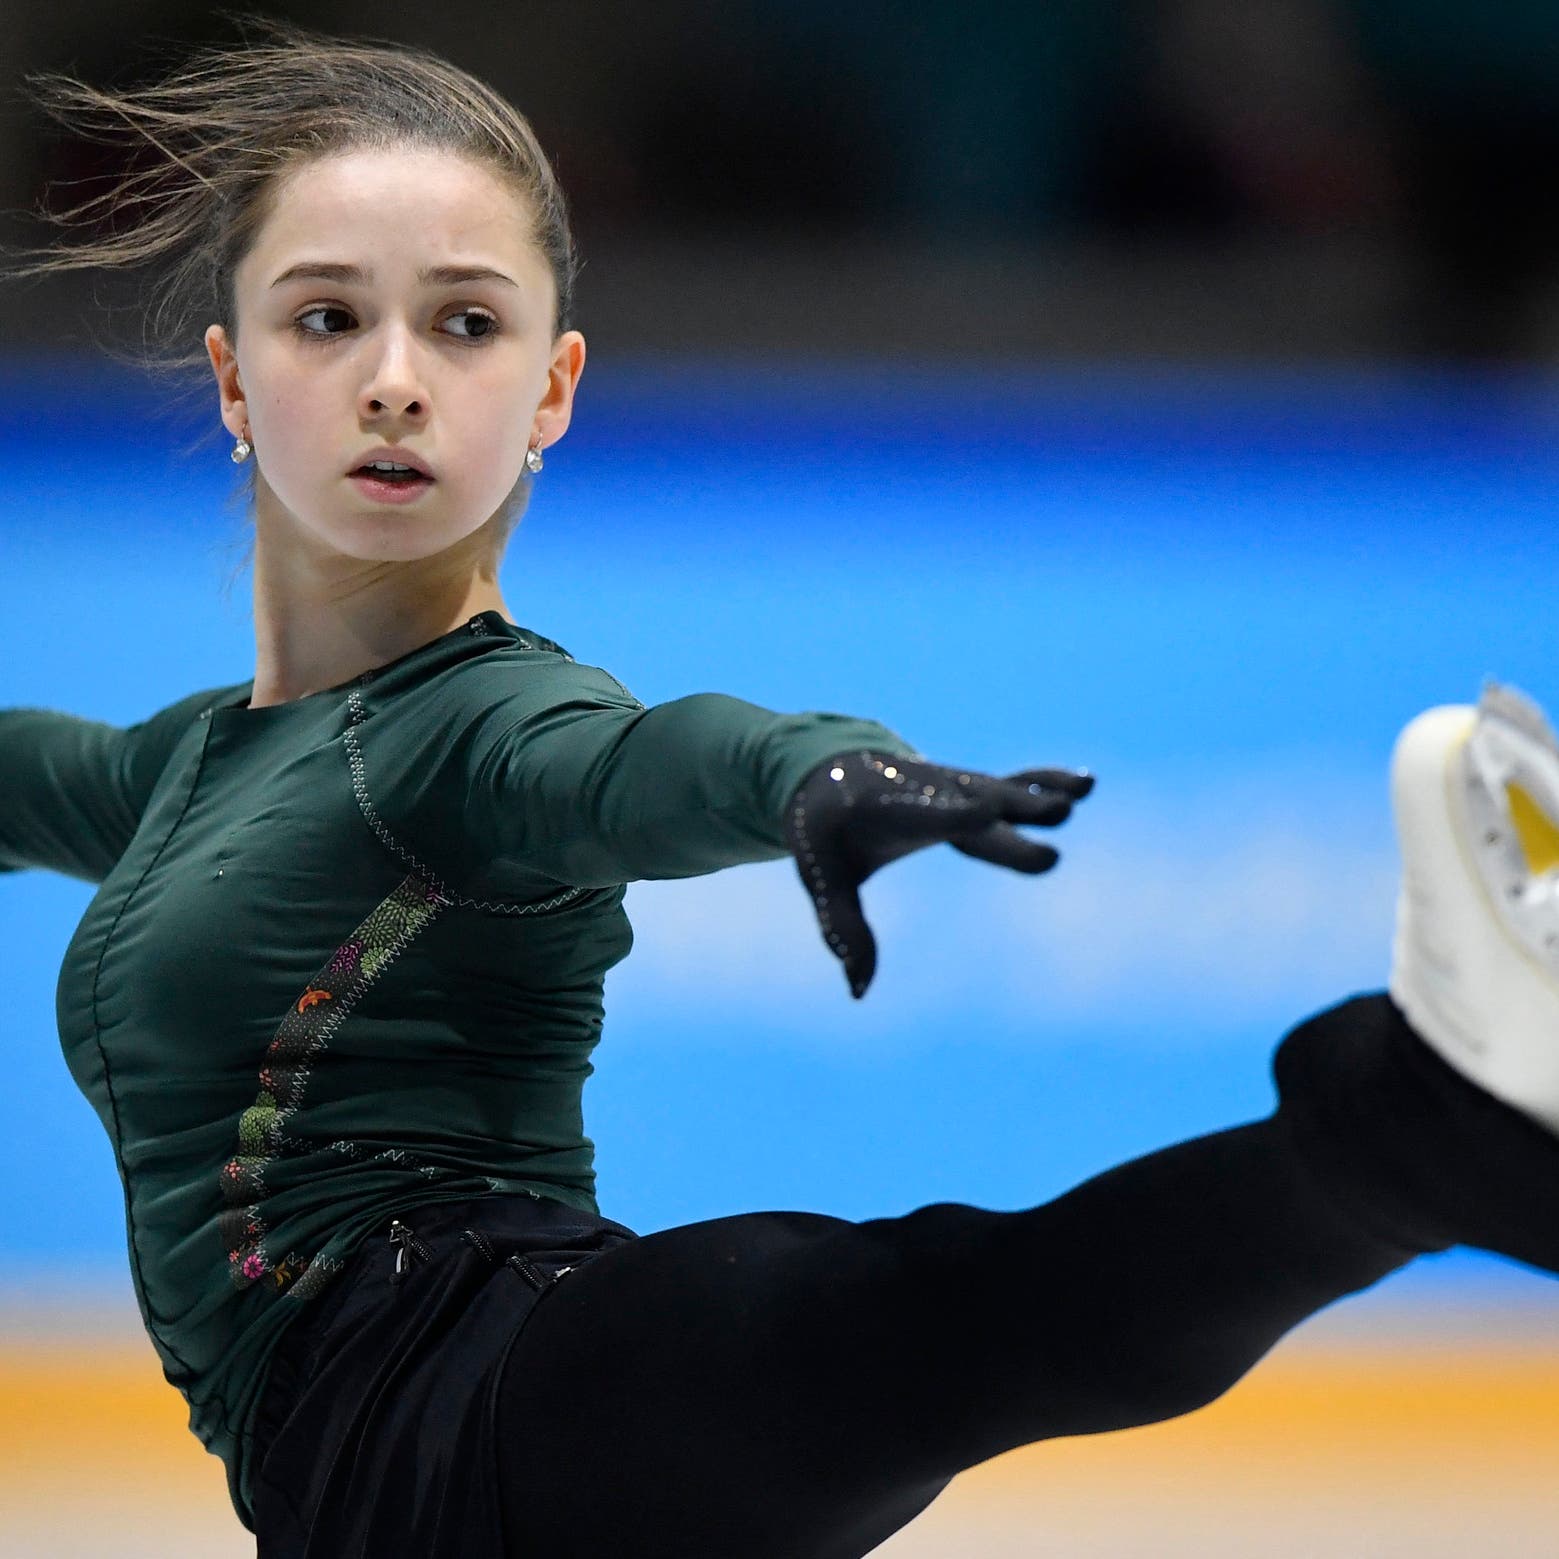 Olympian Valieva’s future not to be decided on ice rink, but in closed-door boardroom